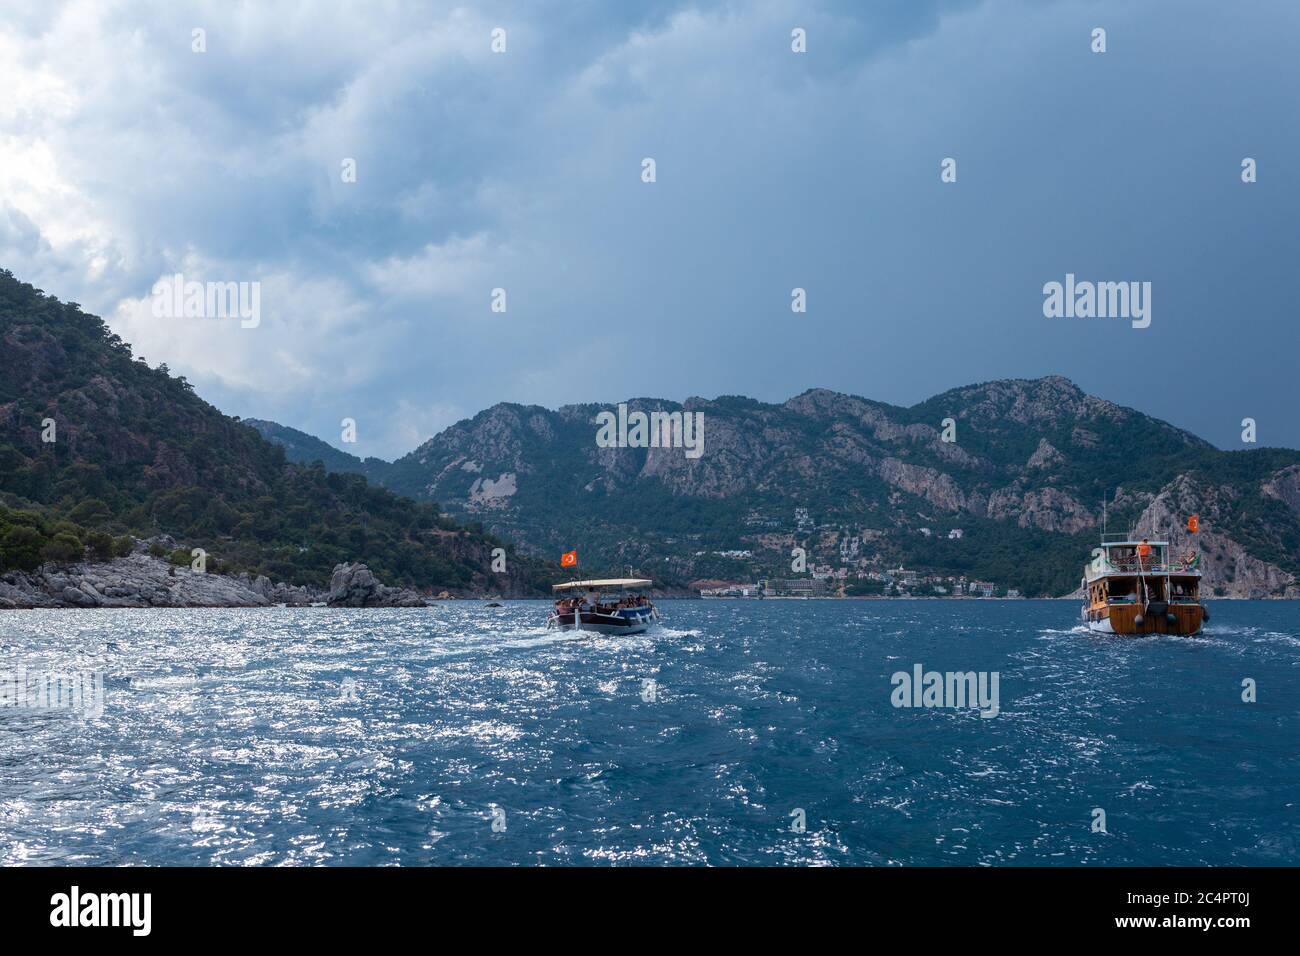 View from the bow of a sea boat on sea boats, mountains and stormy sky Stock Photo